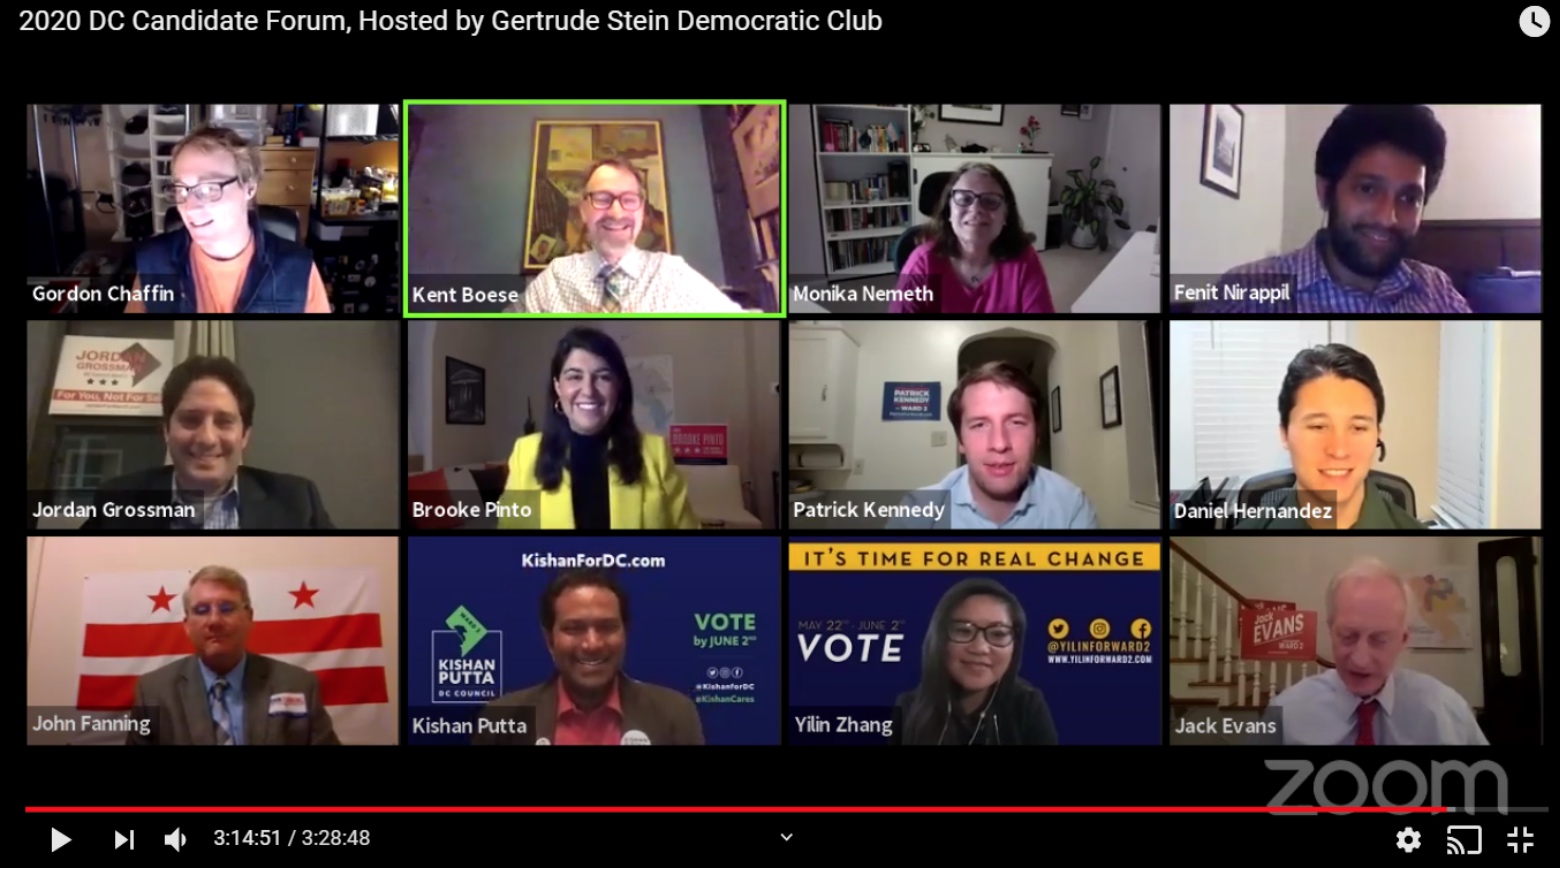 2020 Candidates Forum hosted by the Gertrude Stein Democratic Club